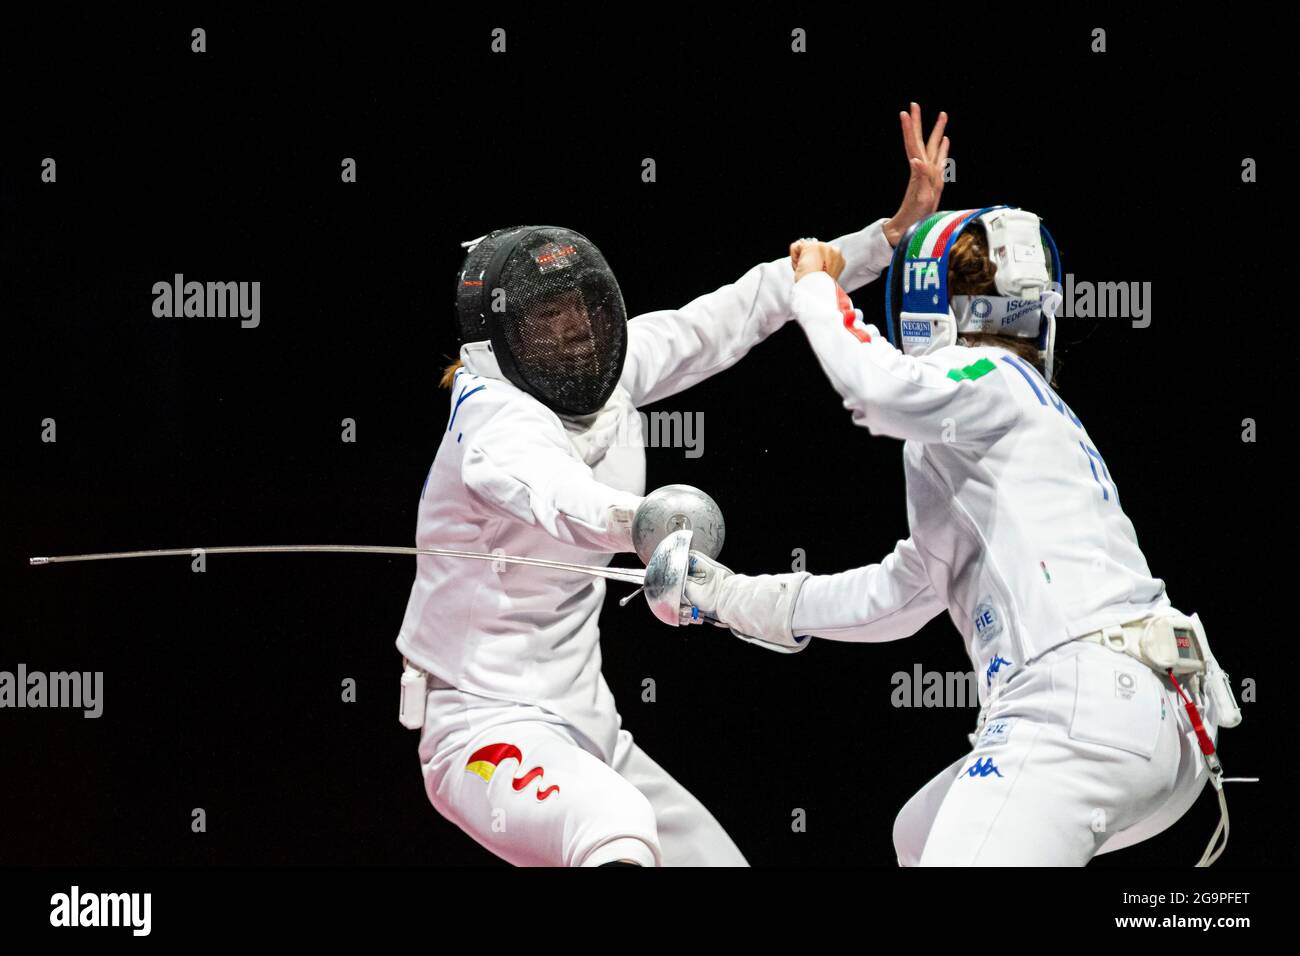 Tokyo, Japan. 27th July 2021. Olympic Games: Fencing, Italy Team (W) wins bronze medal against China at Makuhari Messe.    © ABEL F. ROS / Alamy Live News Stock Photo